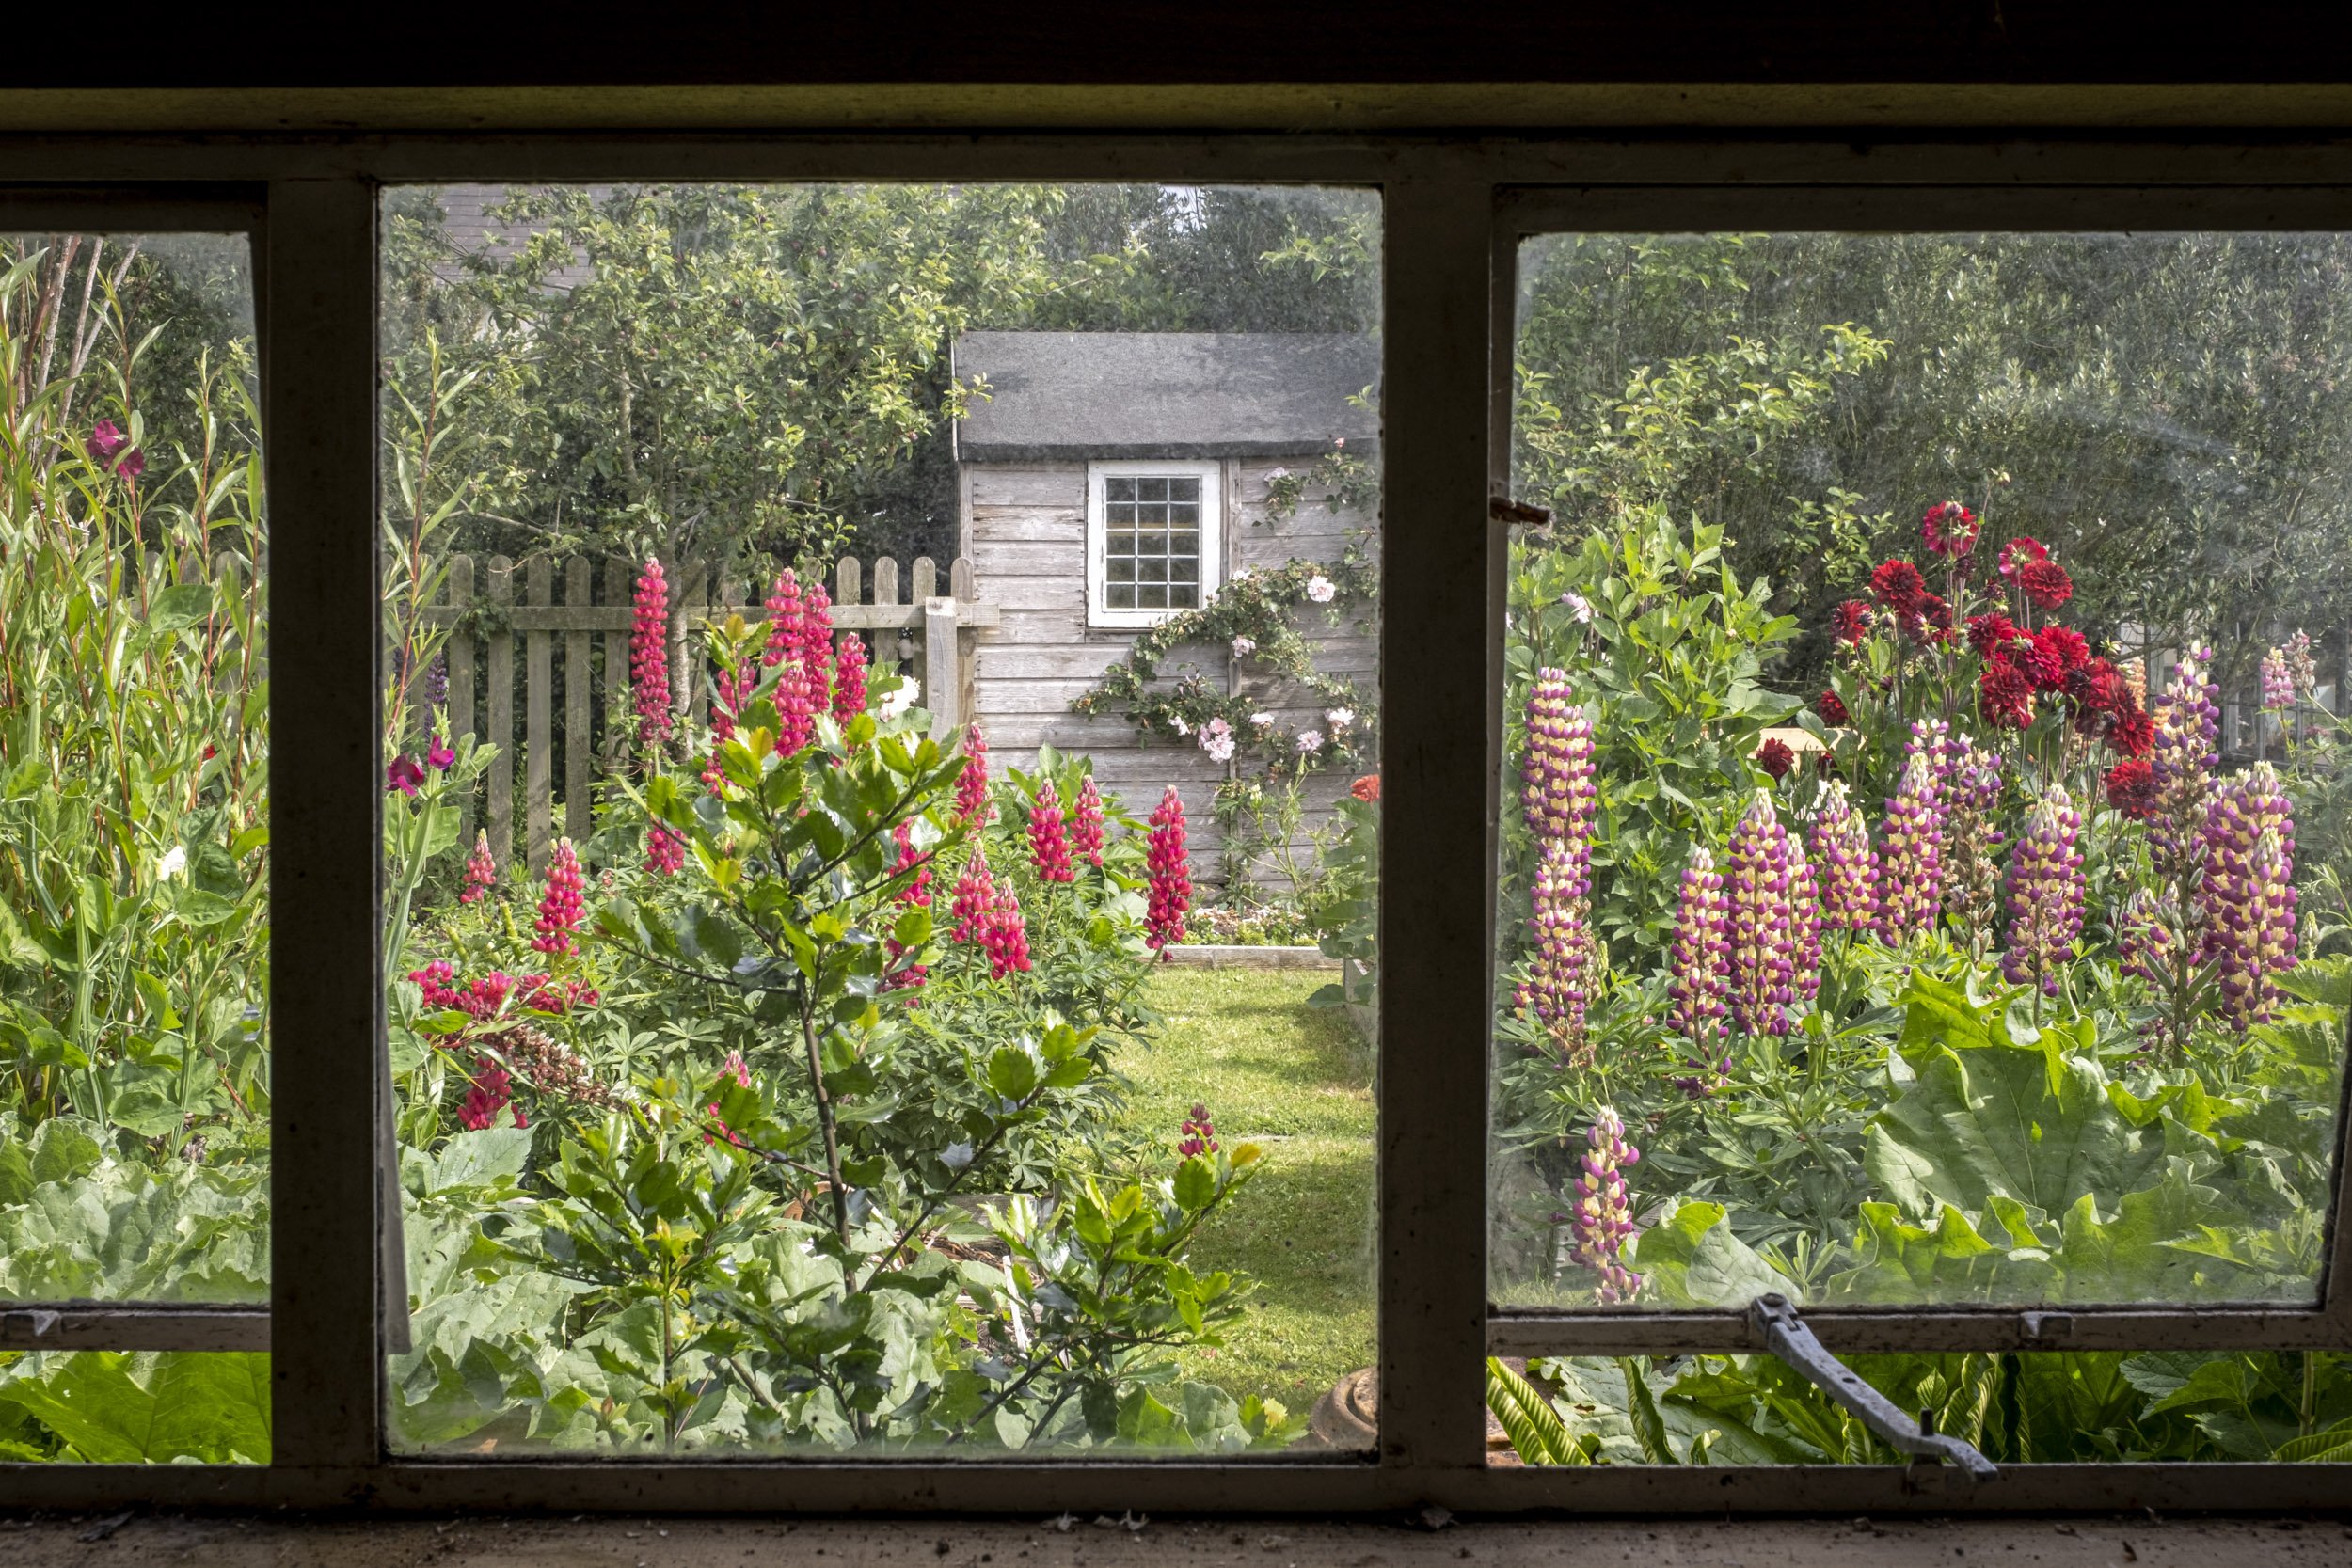 Garden Photography at Beth's Potting shed, Cornwall